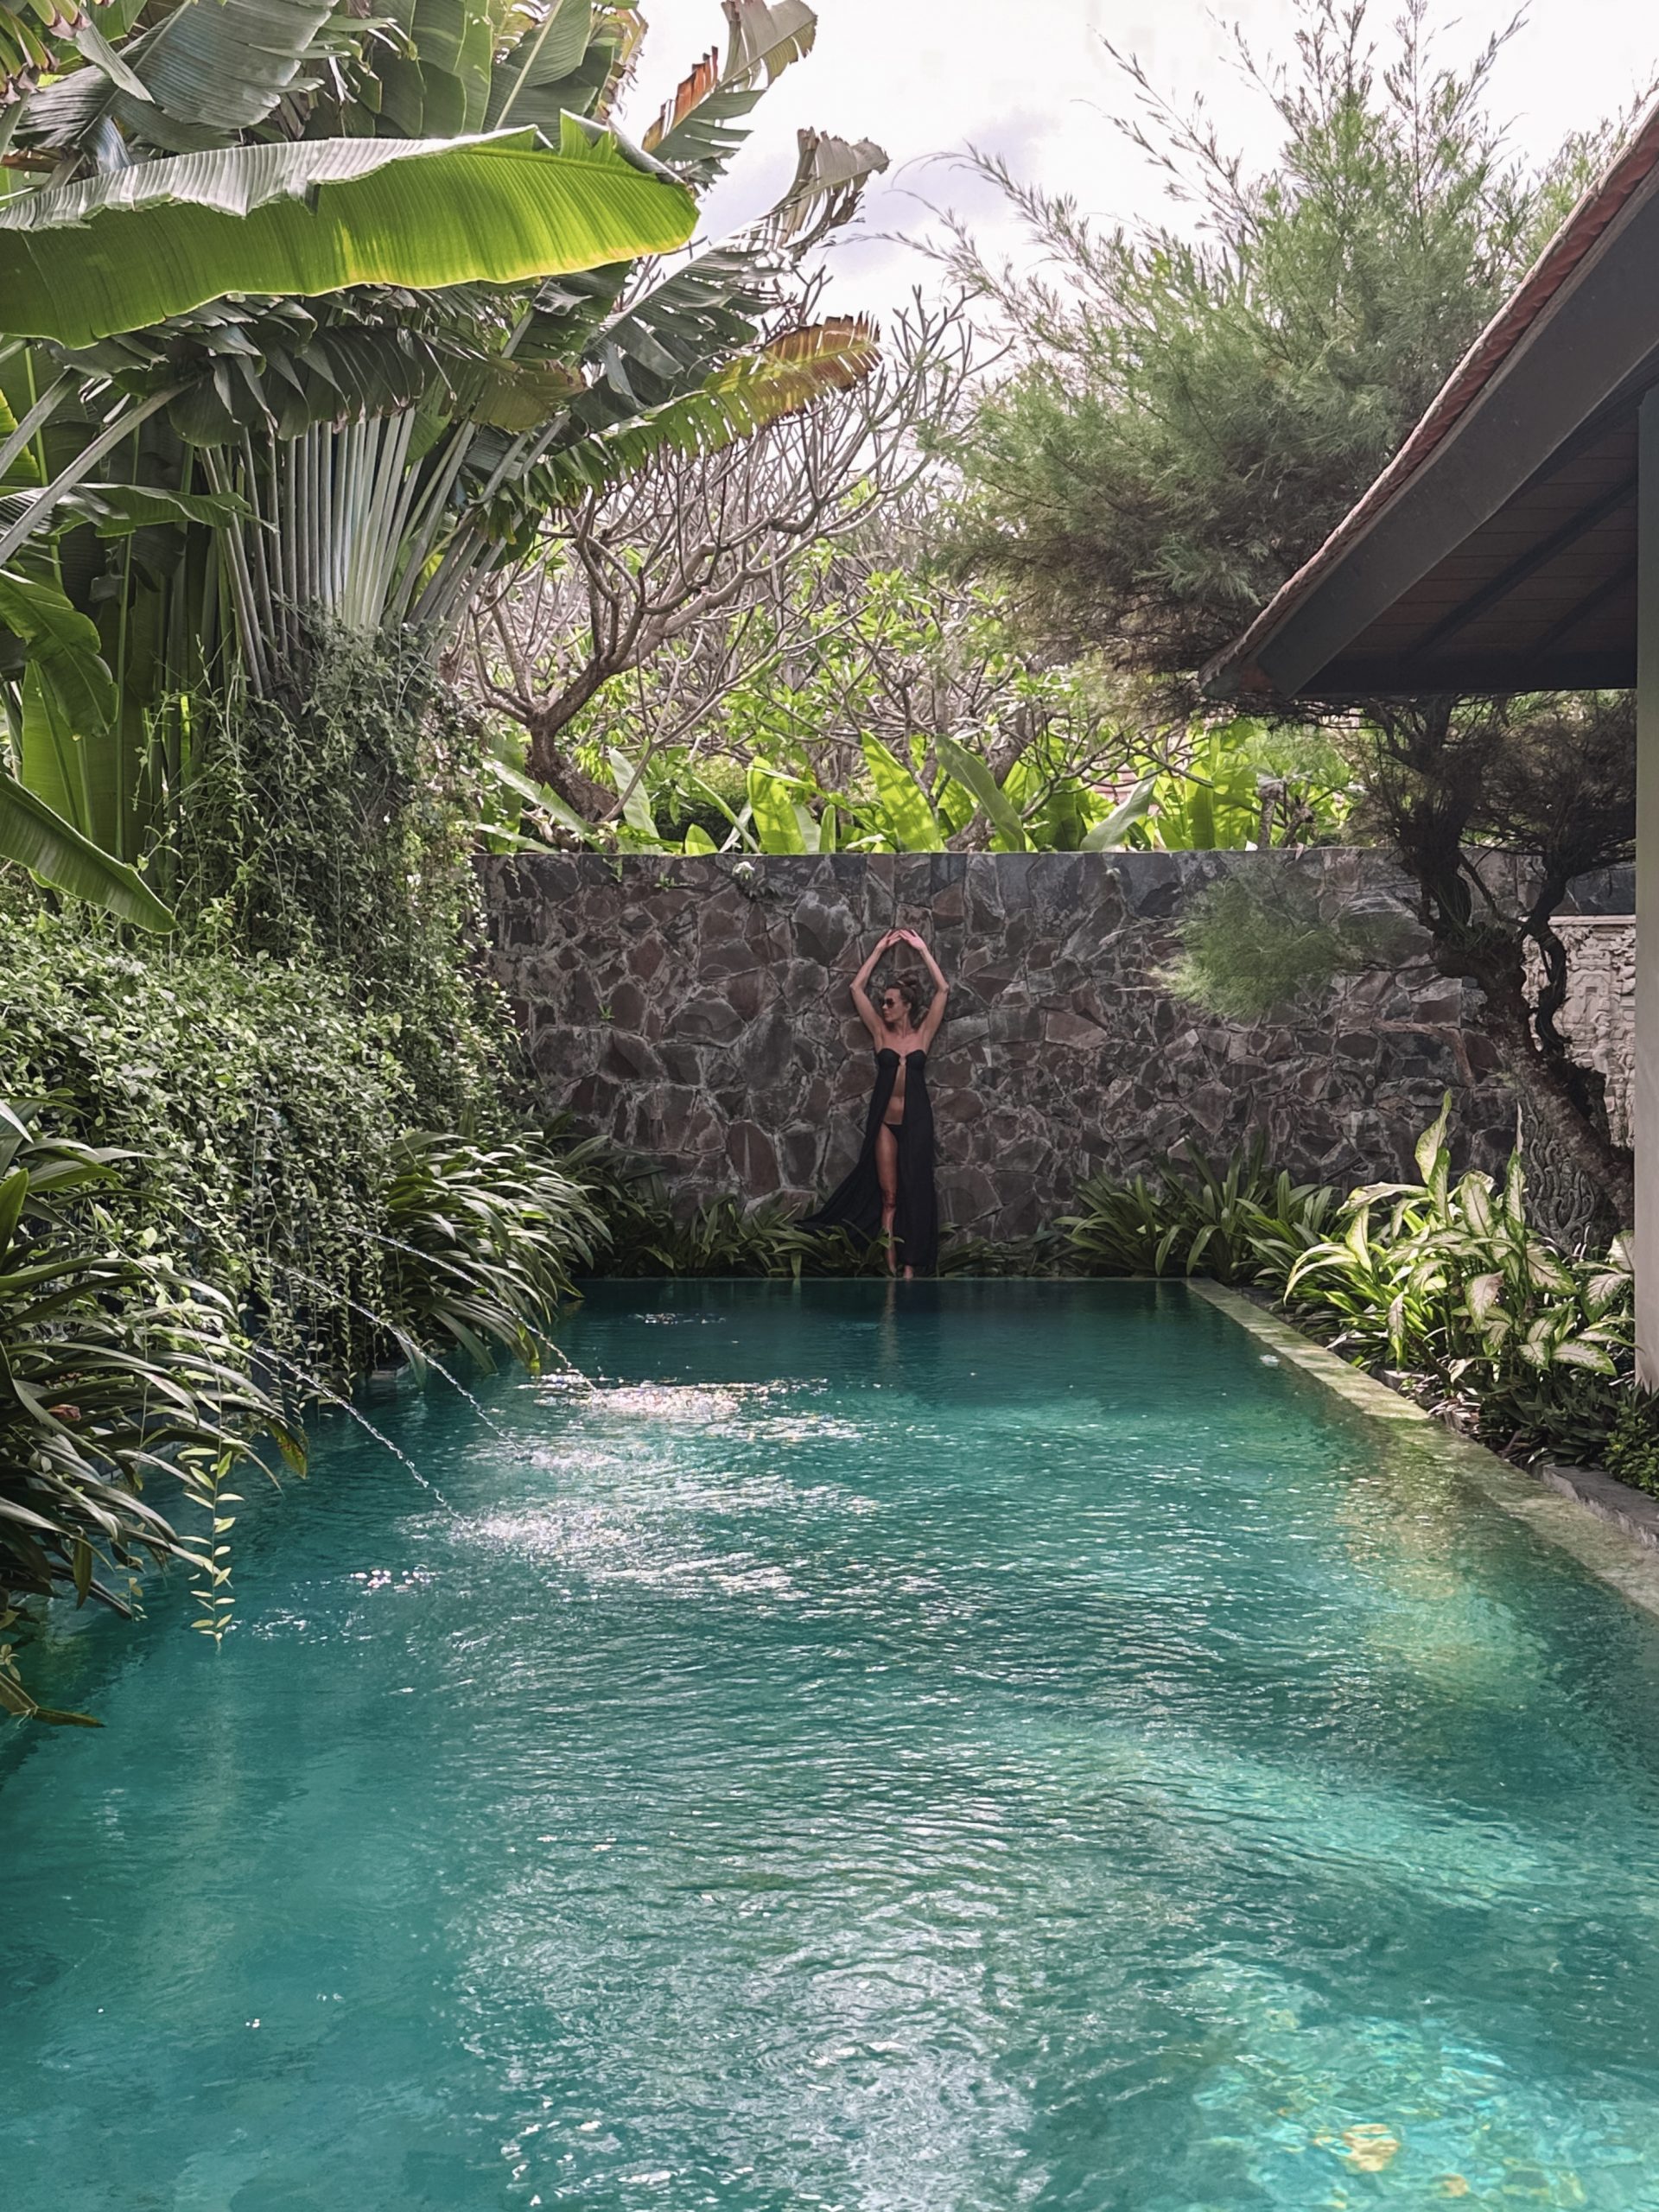 The Royal Purnama - Instagrammable spots